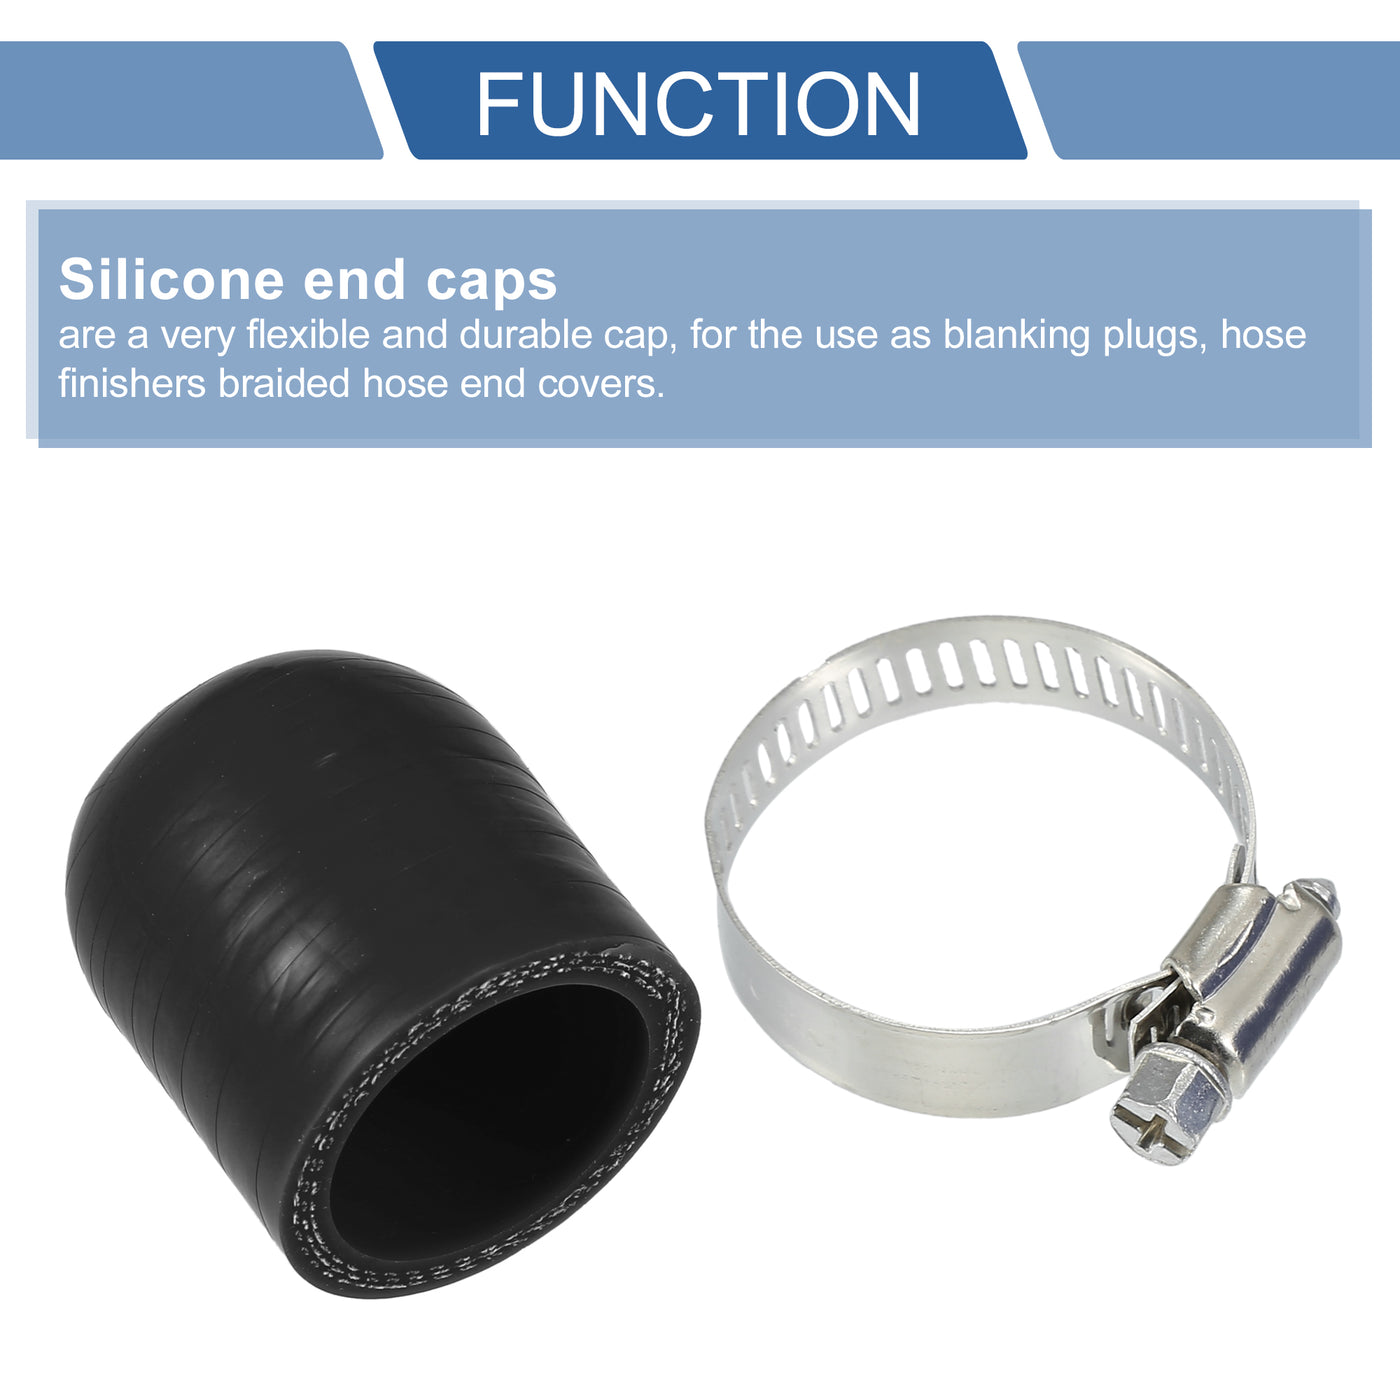 X AUTOHAUX 1 Set 30mm Length 30mm/1.18" ID Black Car Silicone Rubber Hose End Cap with Clamps Silicone Reinforced Blanking Cap for Bypass Tube Universal